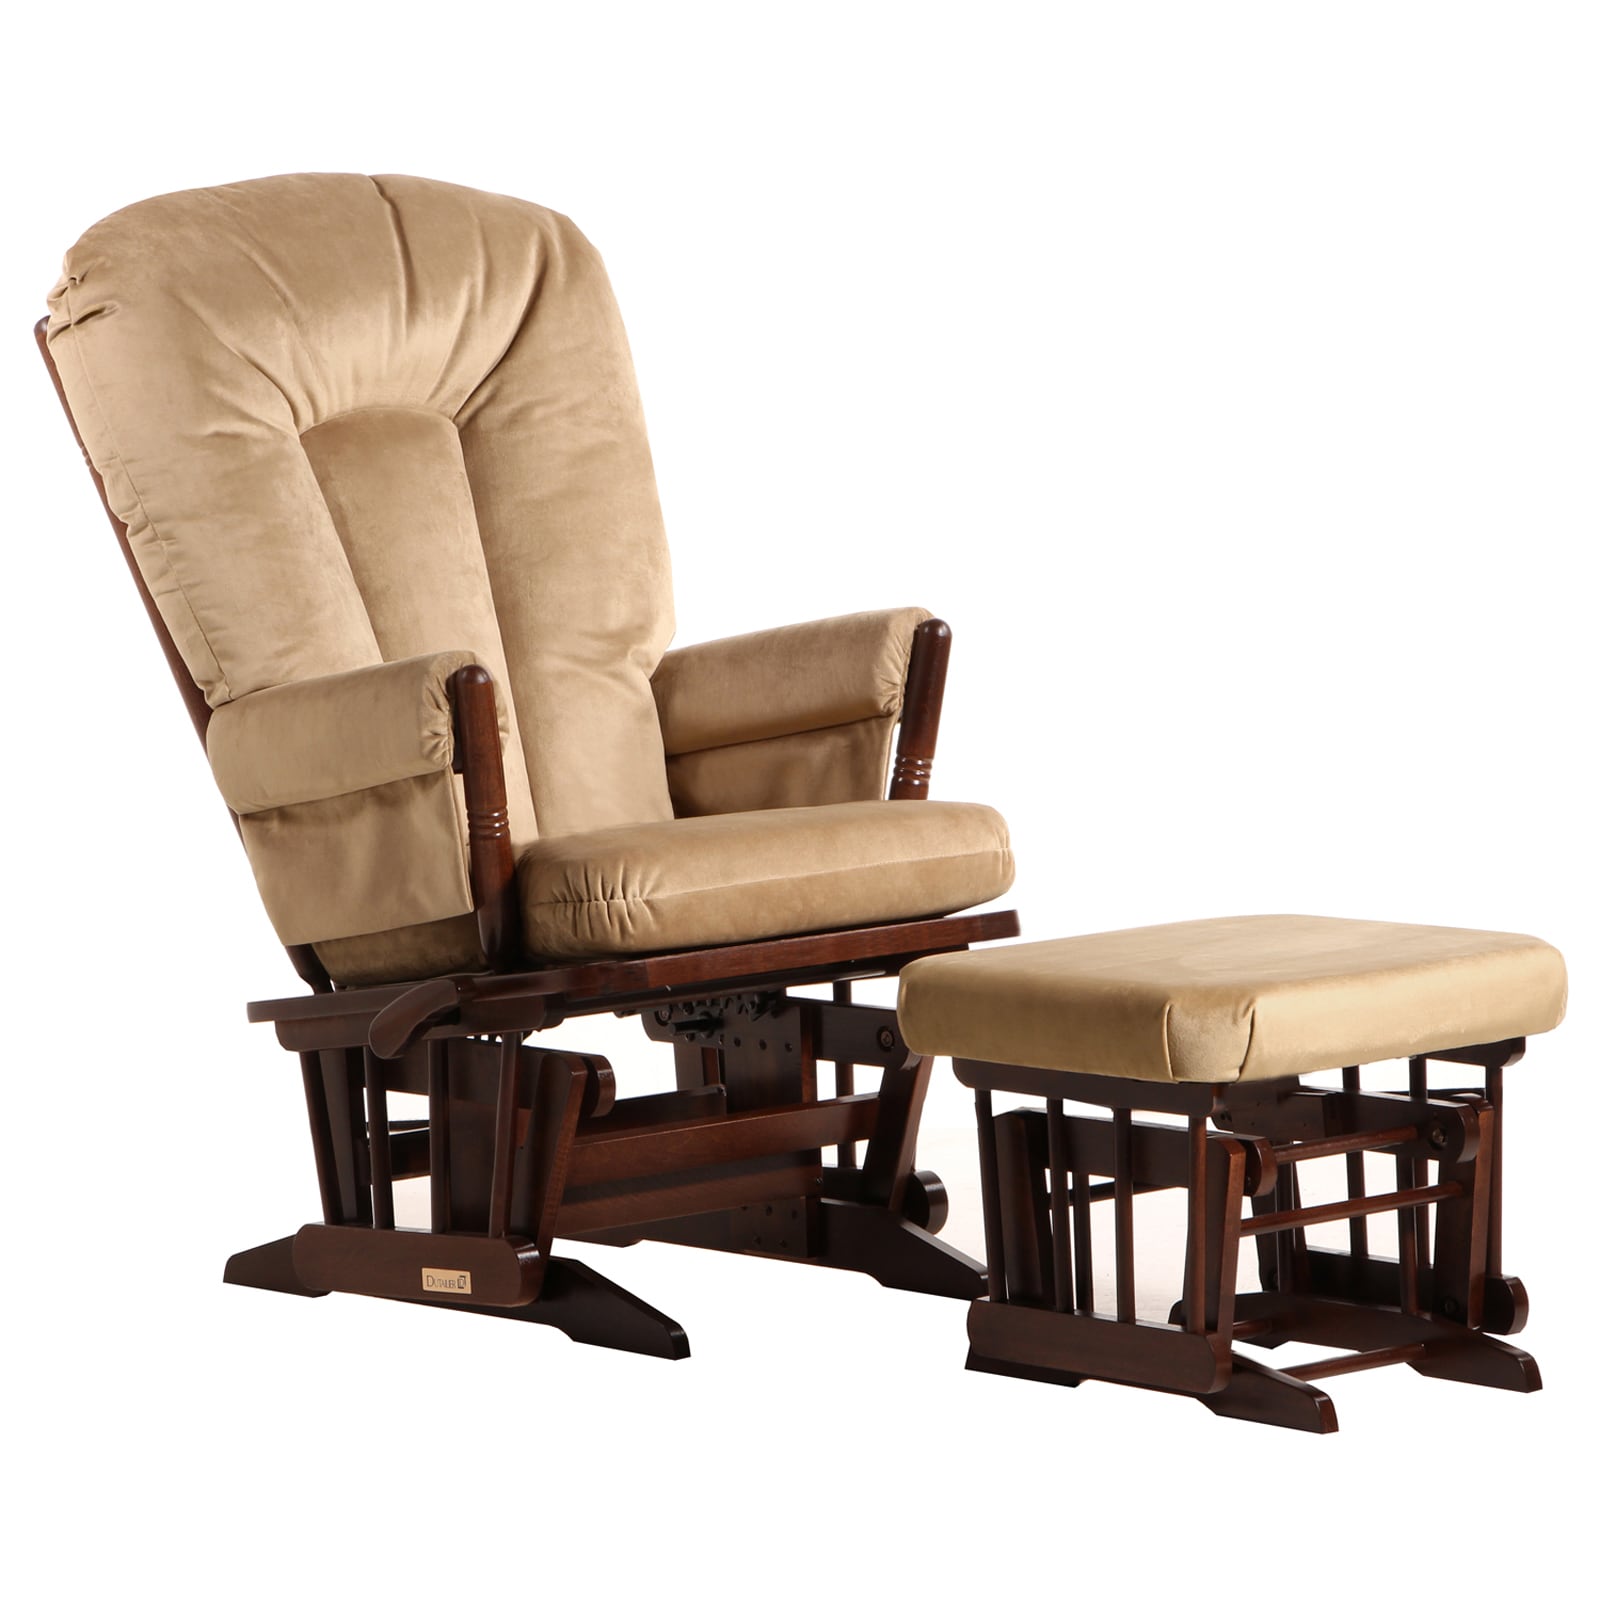 Dutailier Ultramotion Coffee/ Light Brown Multi position, Recline 2 post Glider And Nursing Ottoman Set